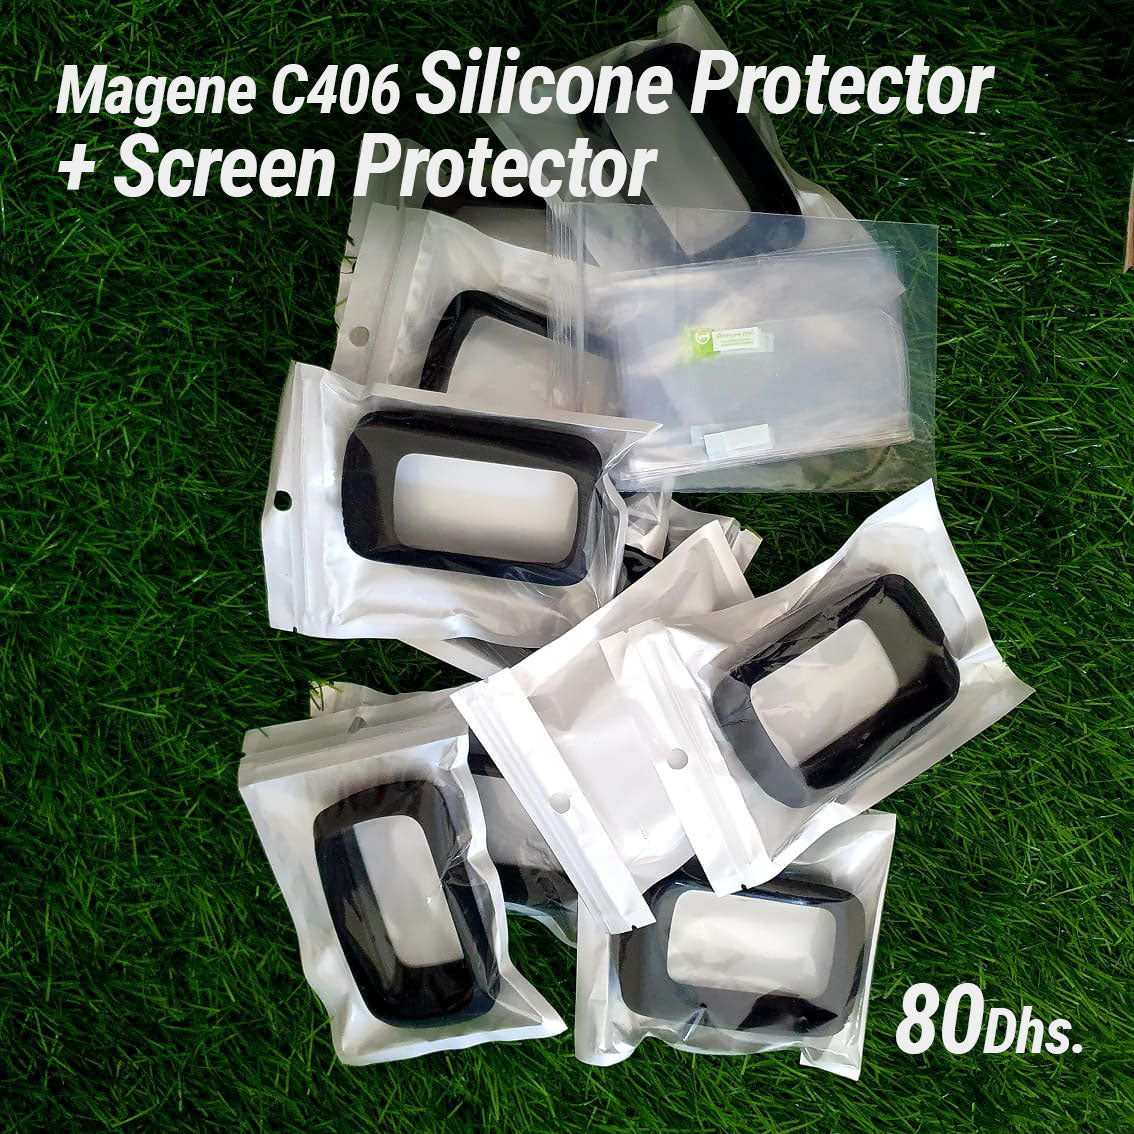 Magene C406 Silicone Protector + Screen Protector